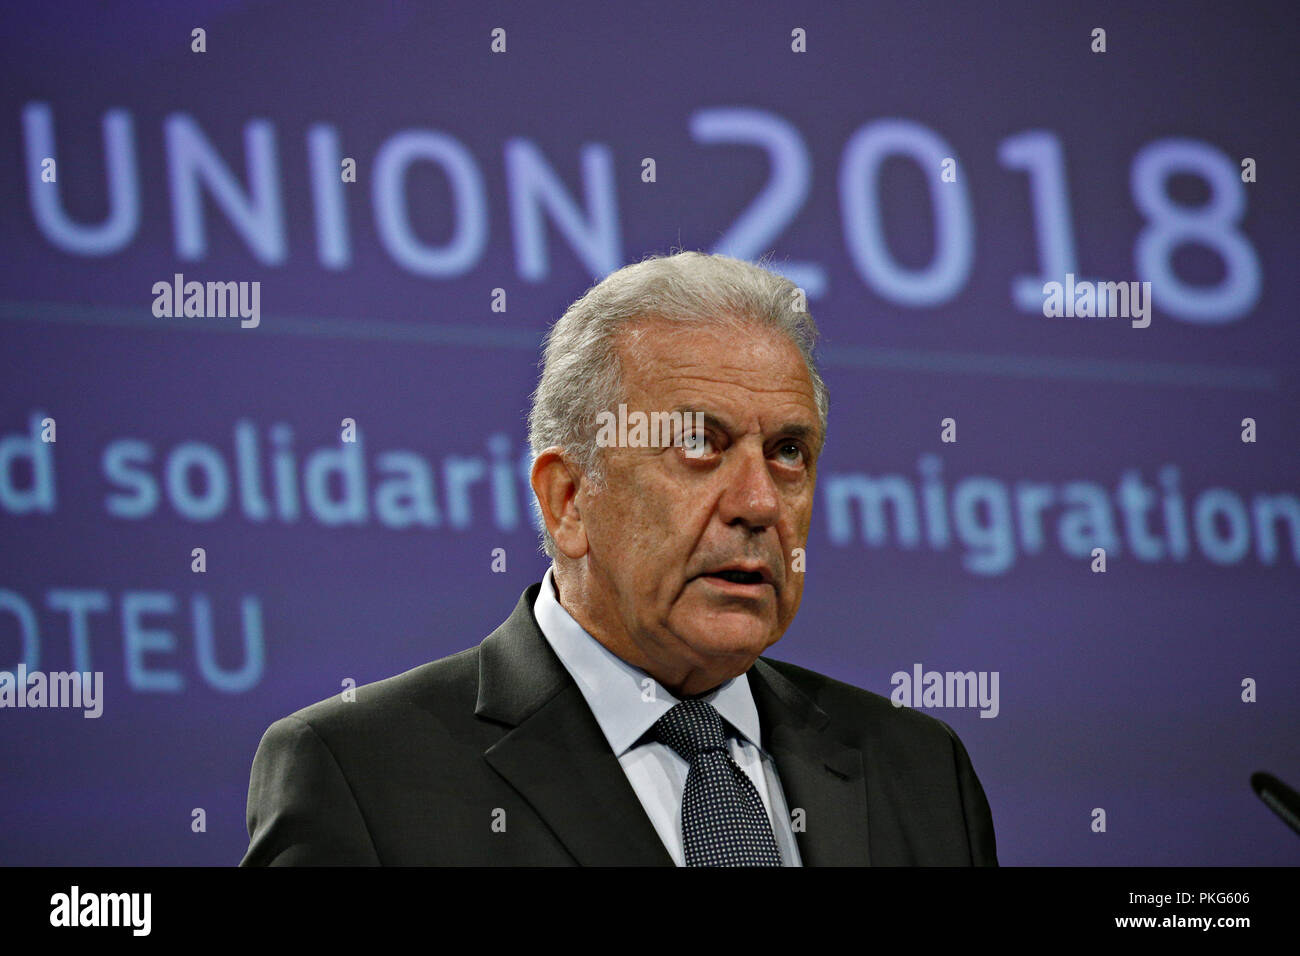 Brussels, Belgium. 13th Sept. 2018.EU Commissioner for Migration Dimitris Avramopoulos gives a press conference on new measures for stronger EU borders and solidarity on migration. Alexandros Michailidis/Alamy Live News Stock Photo